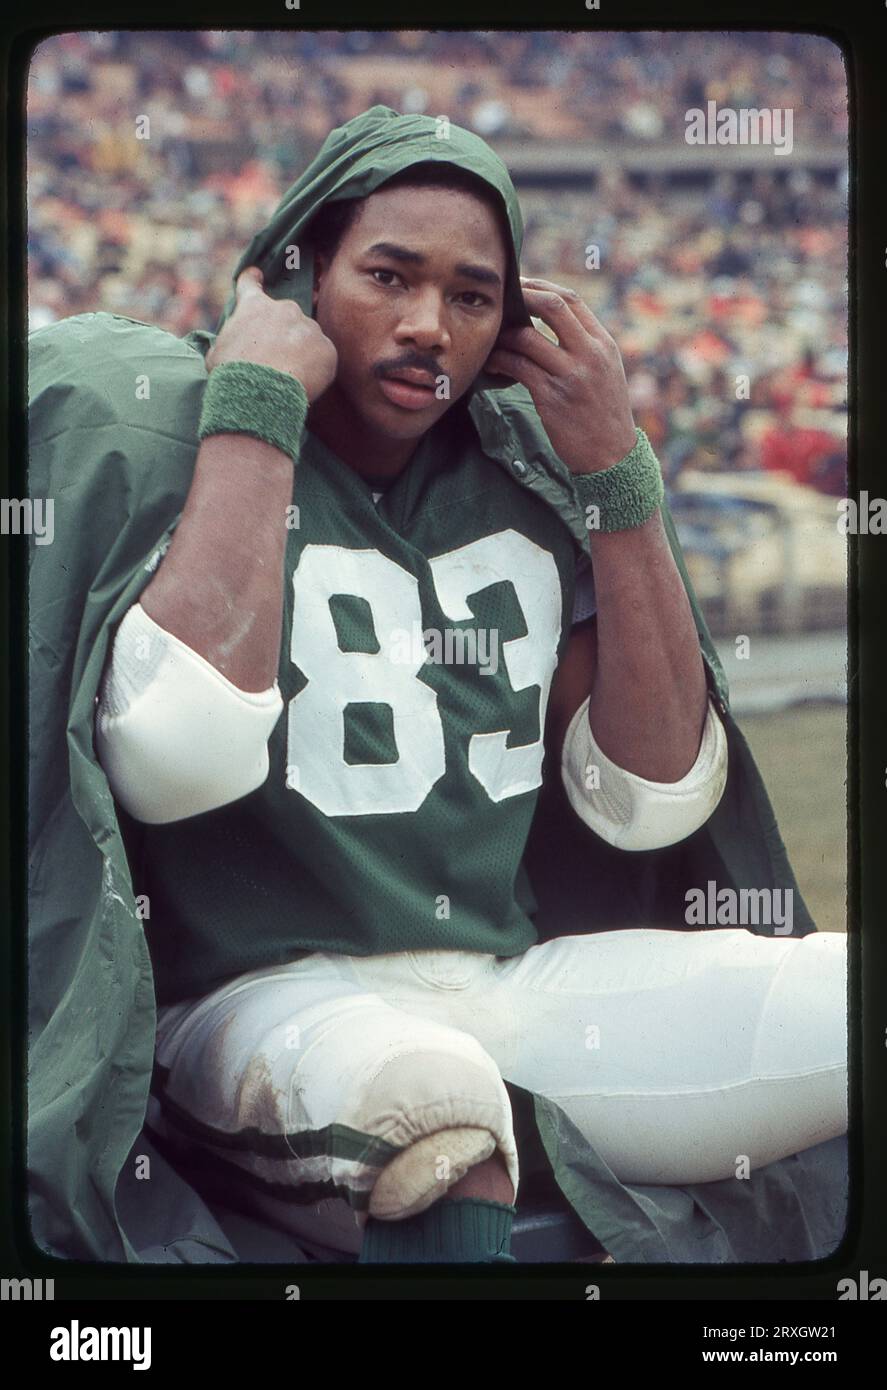 Portrait of New York Jets receiver Jerome Barkum who was seated on the bench during a game at Shea Stadium in Flushing, Queens, New York in the late 1970s. Stock Photo